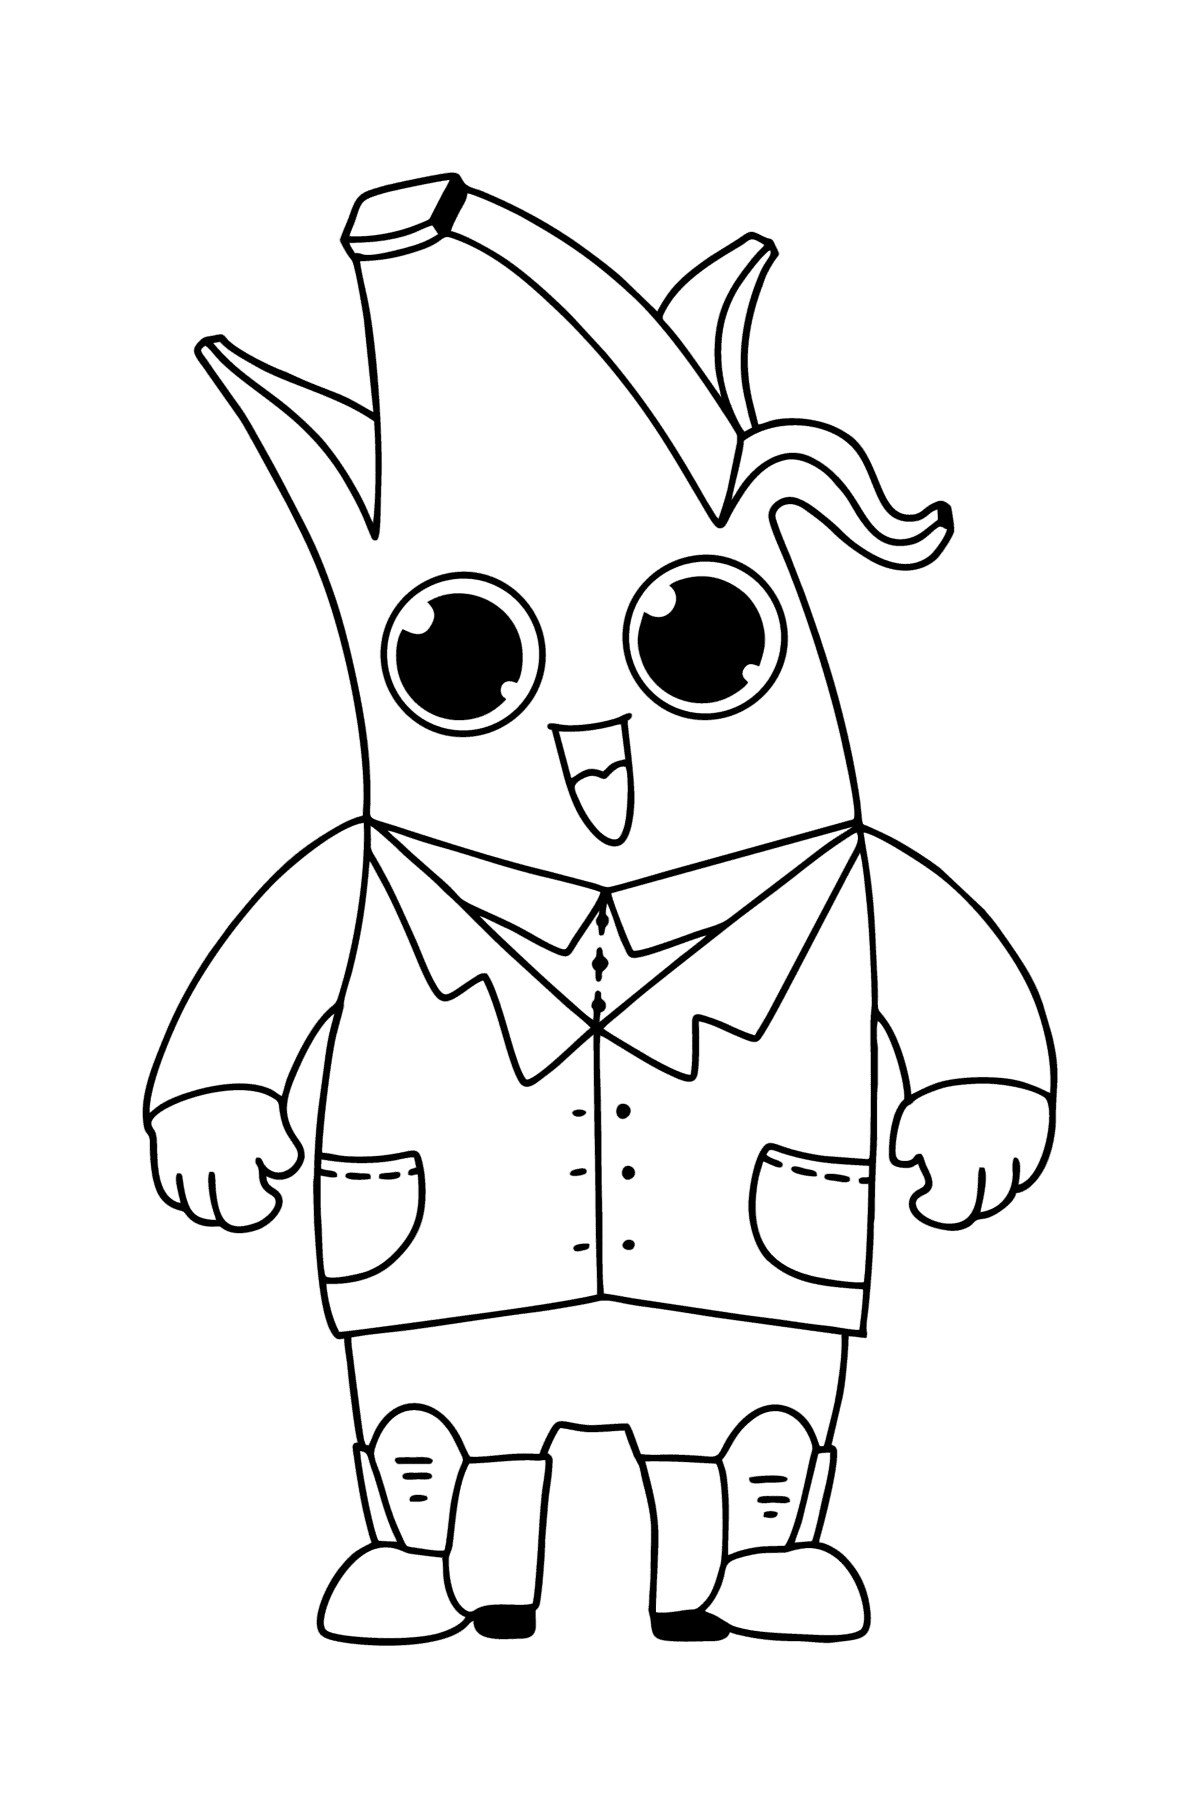 Fortnite Funko POP Peely coloring page - Coloring Pages for Kids